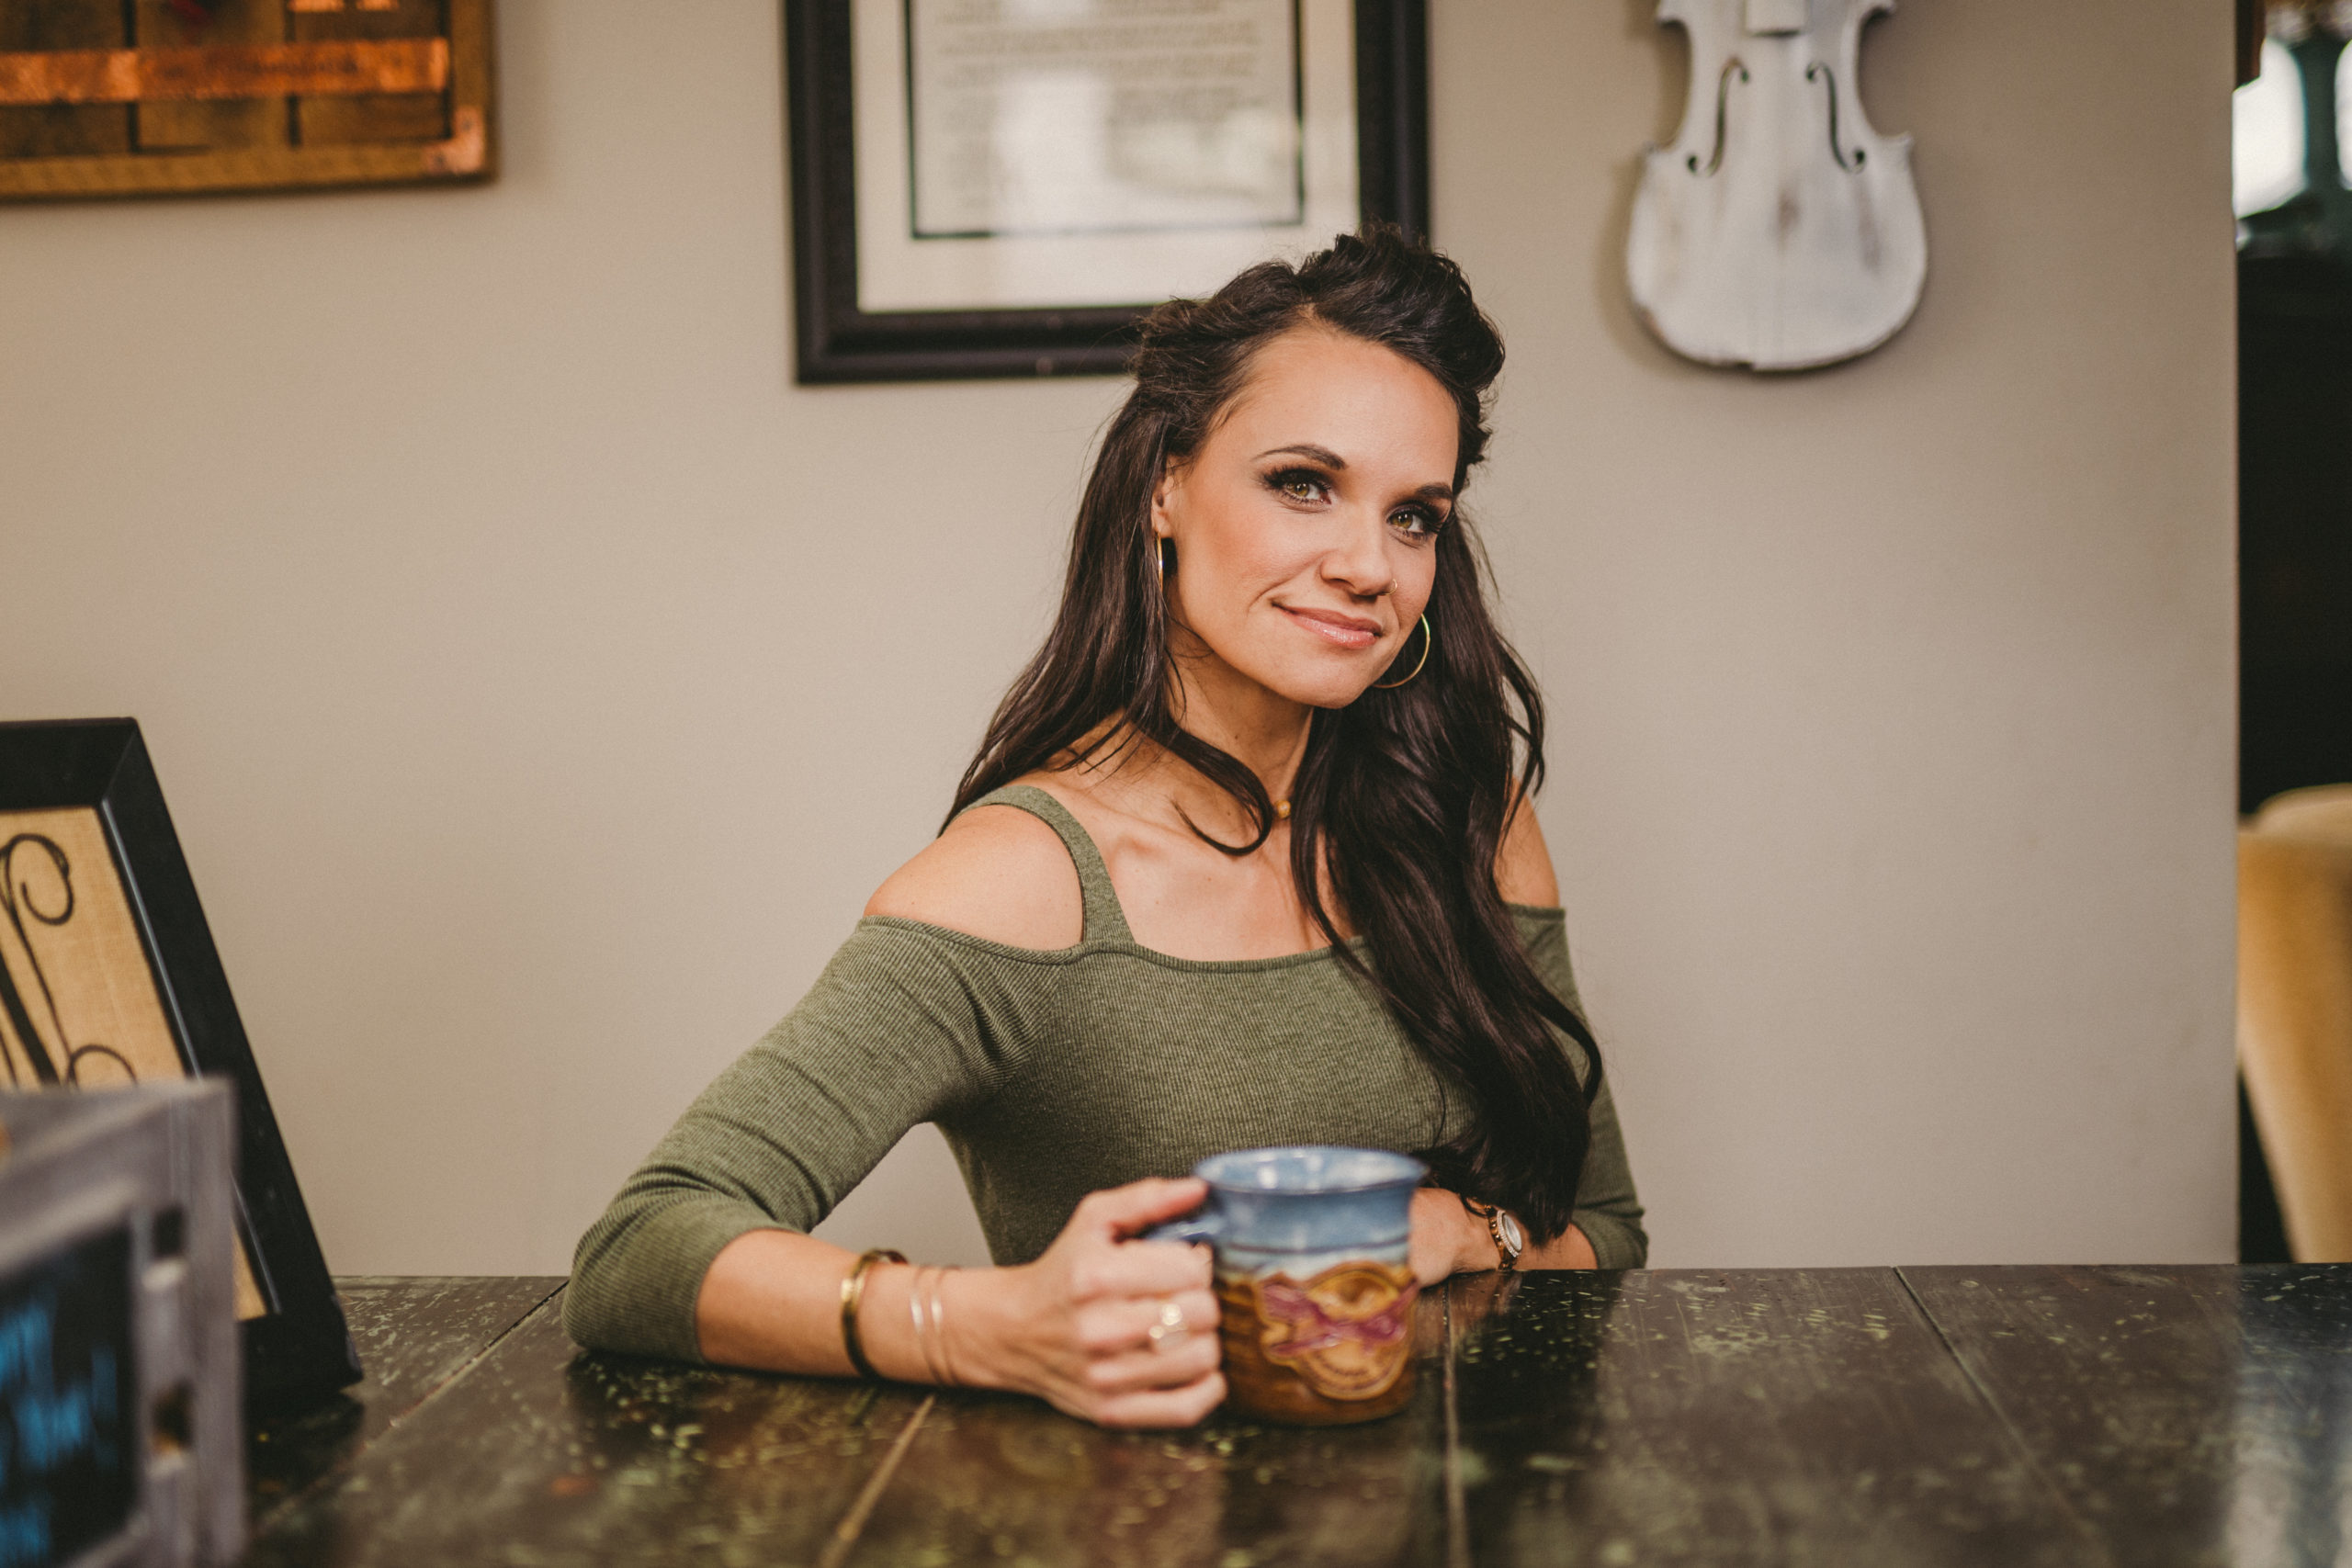 Woman with long brown hair posing for the camera holding a blue and brown coffee cup